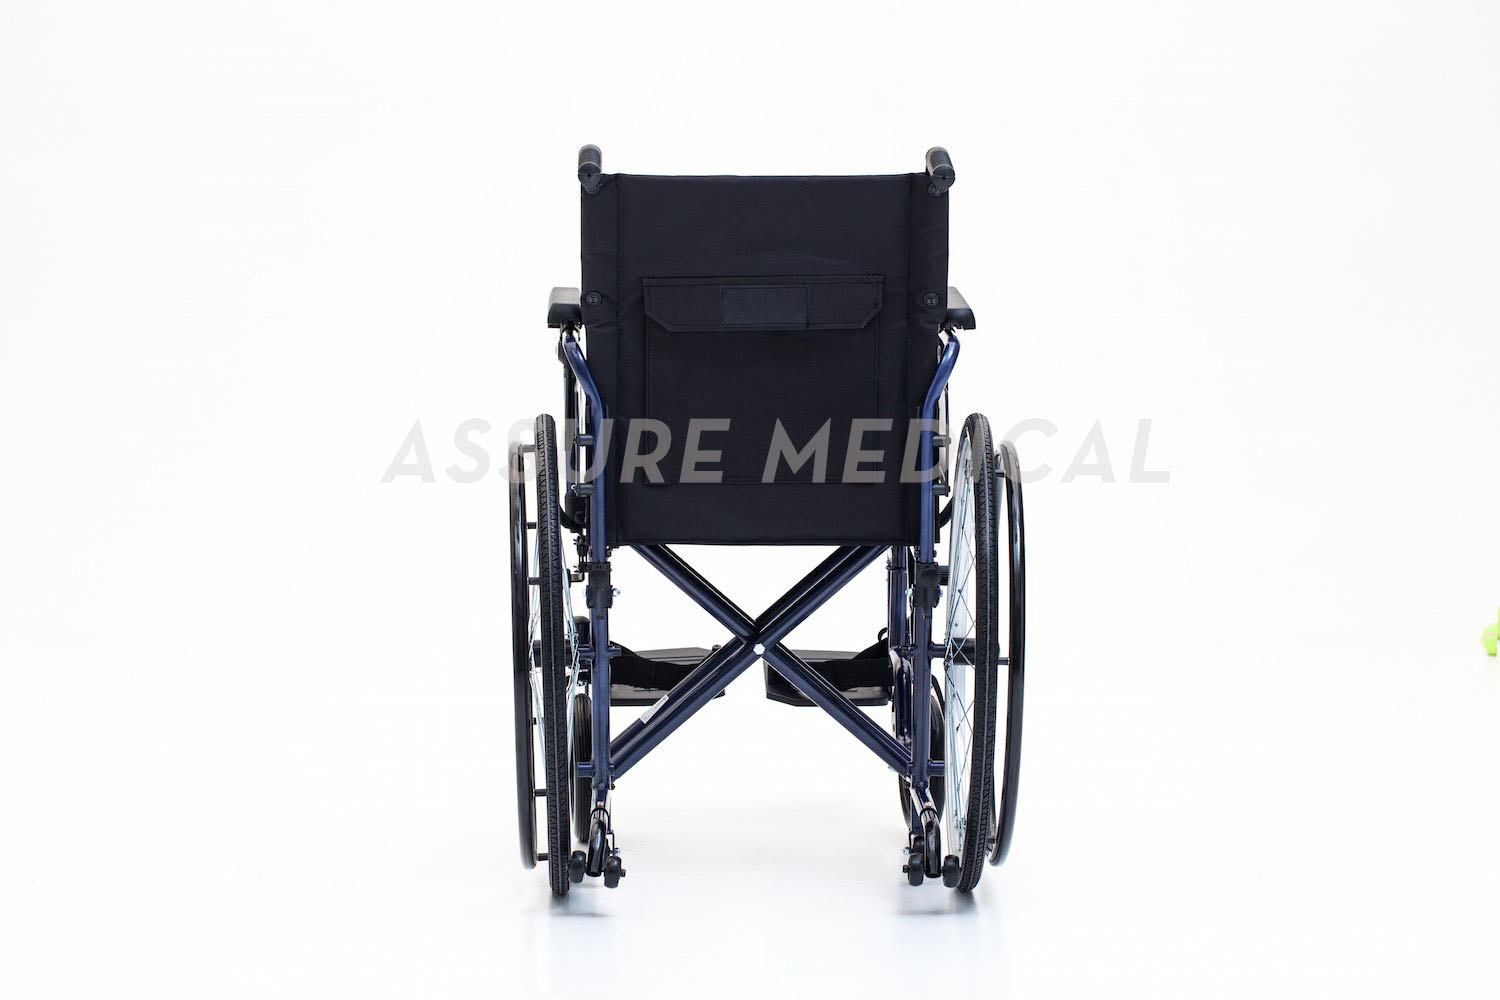 YJ-028 Steel Manual Wheelchair with height adjustable armrest for Elderly People